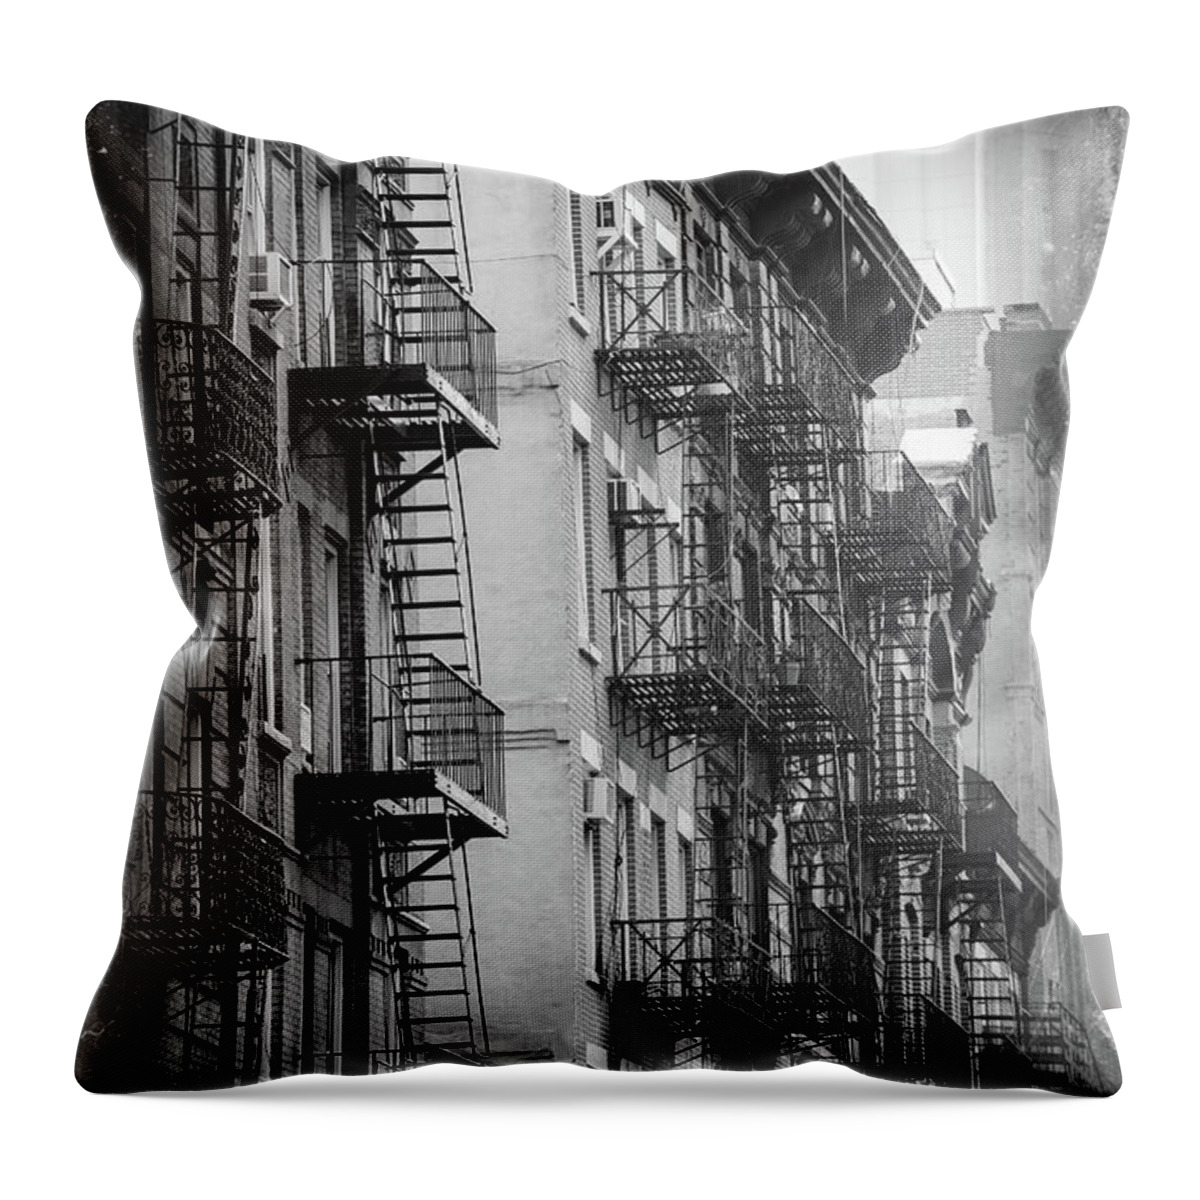 Steps Throw Pillow featuring the photograph House Of Manhattan, New York City by Zodebala